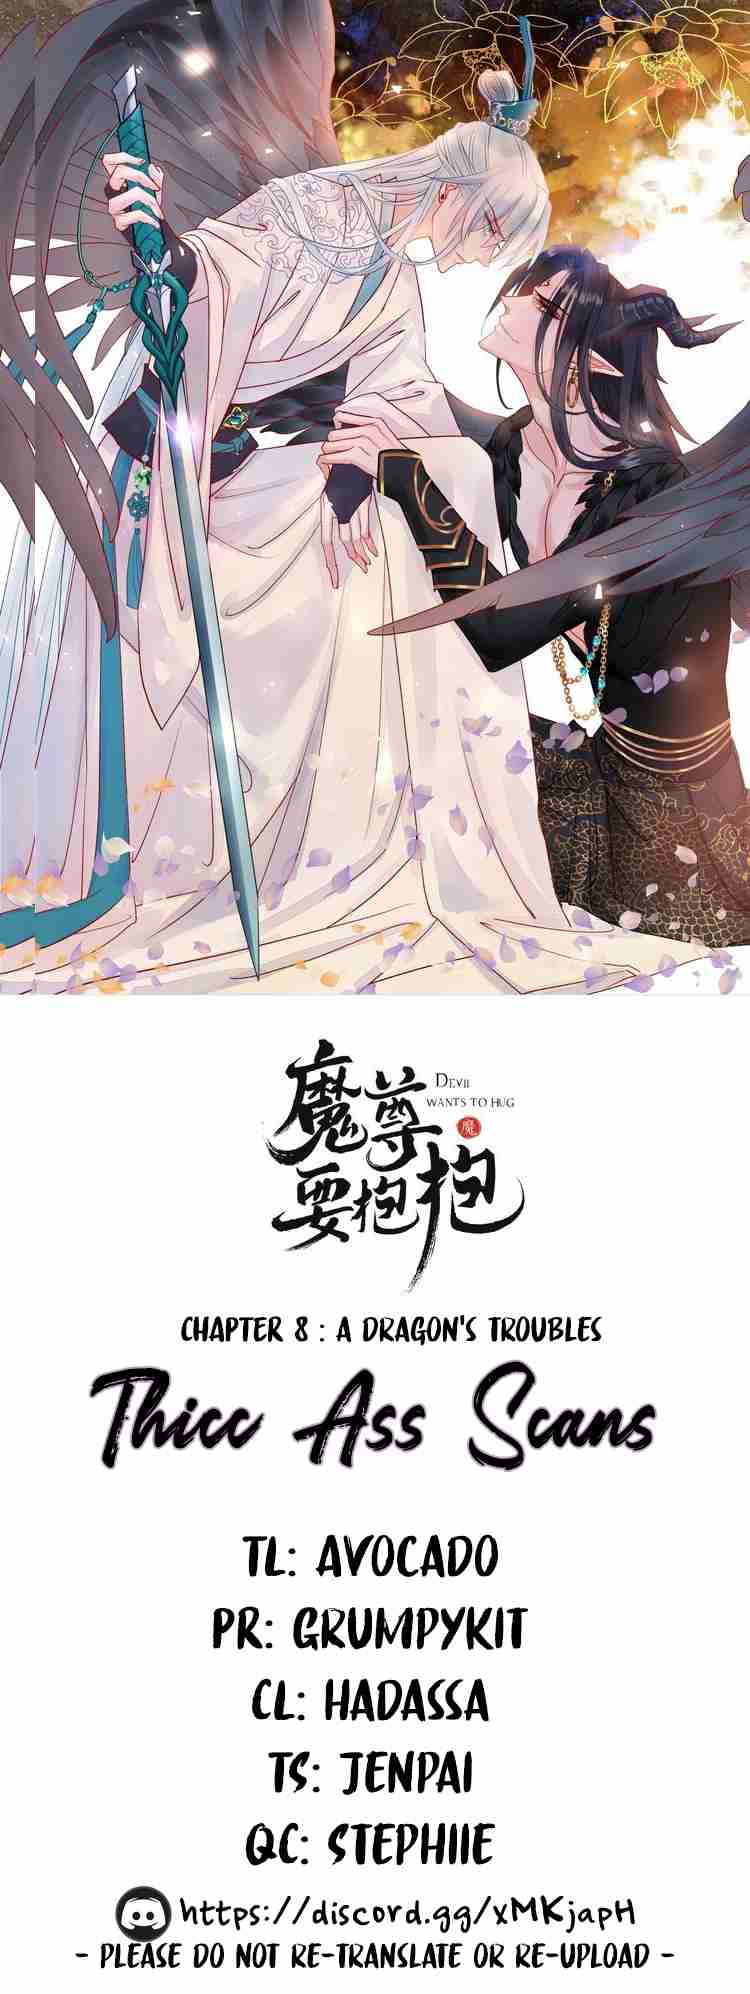 Devil Wants To Hug Ch. 8 A Dragon's Troubles